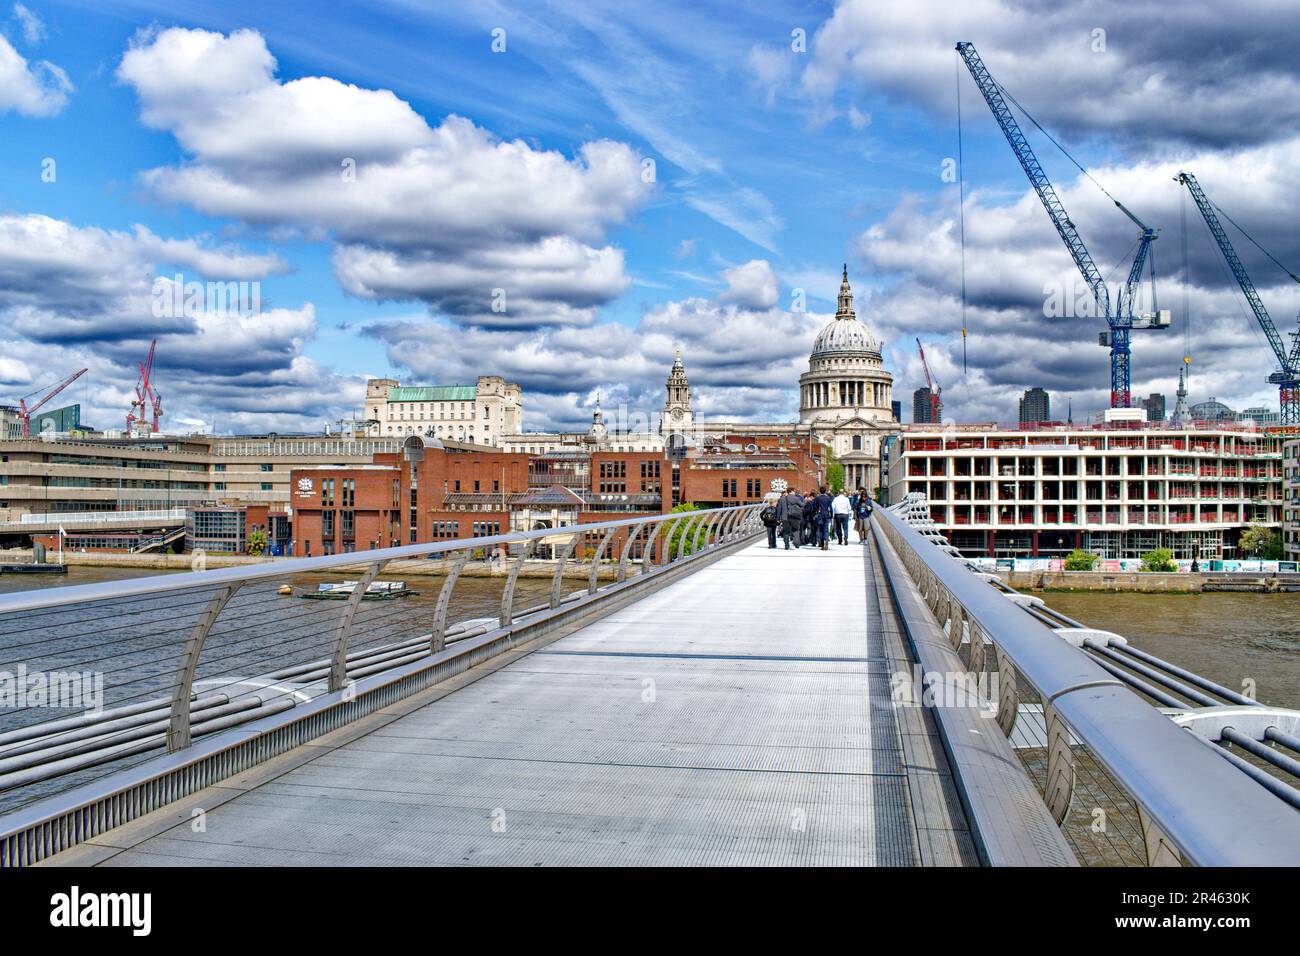 London St Pauls Cathedral the Millennium Footbridge with cranes and new buildings Stock Photo